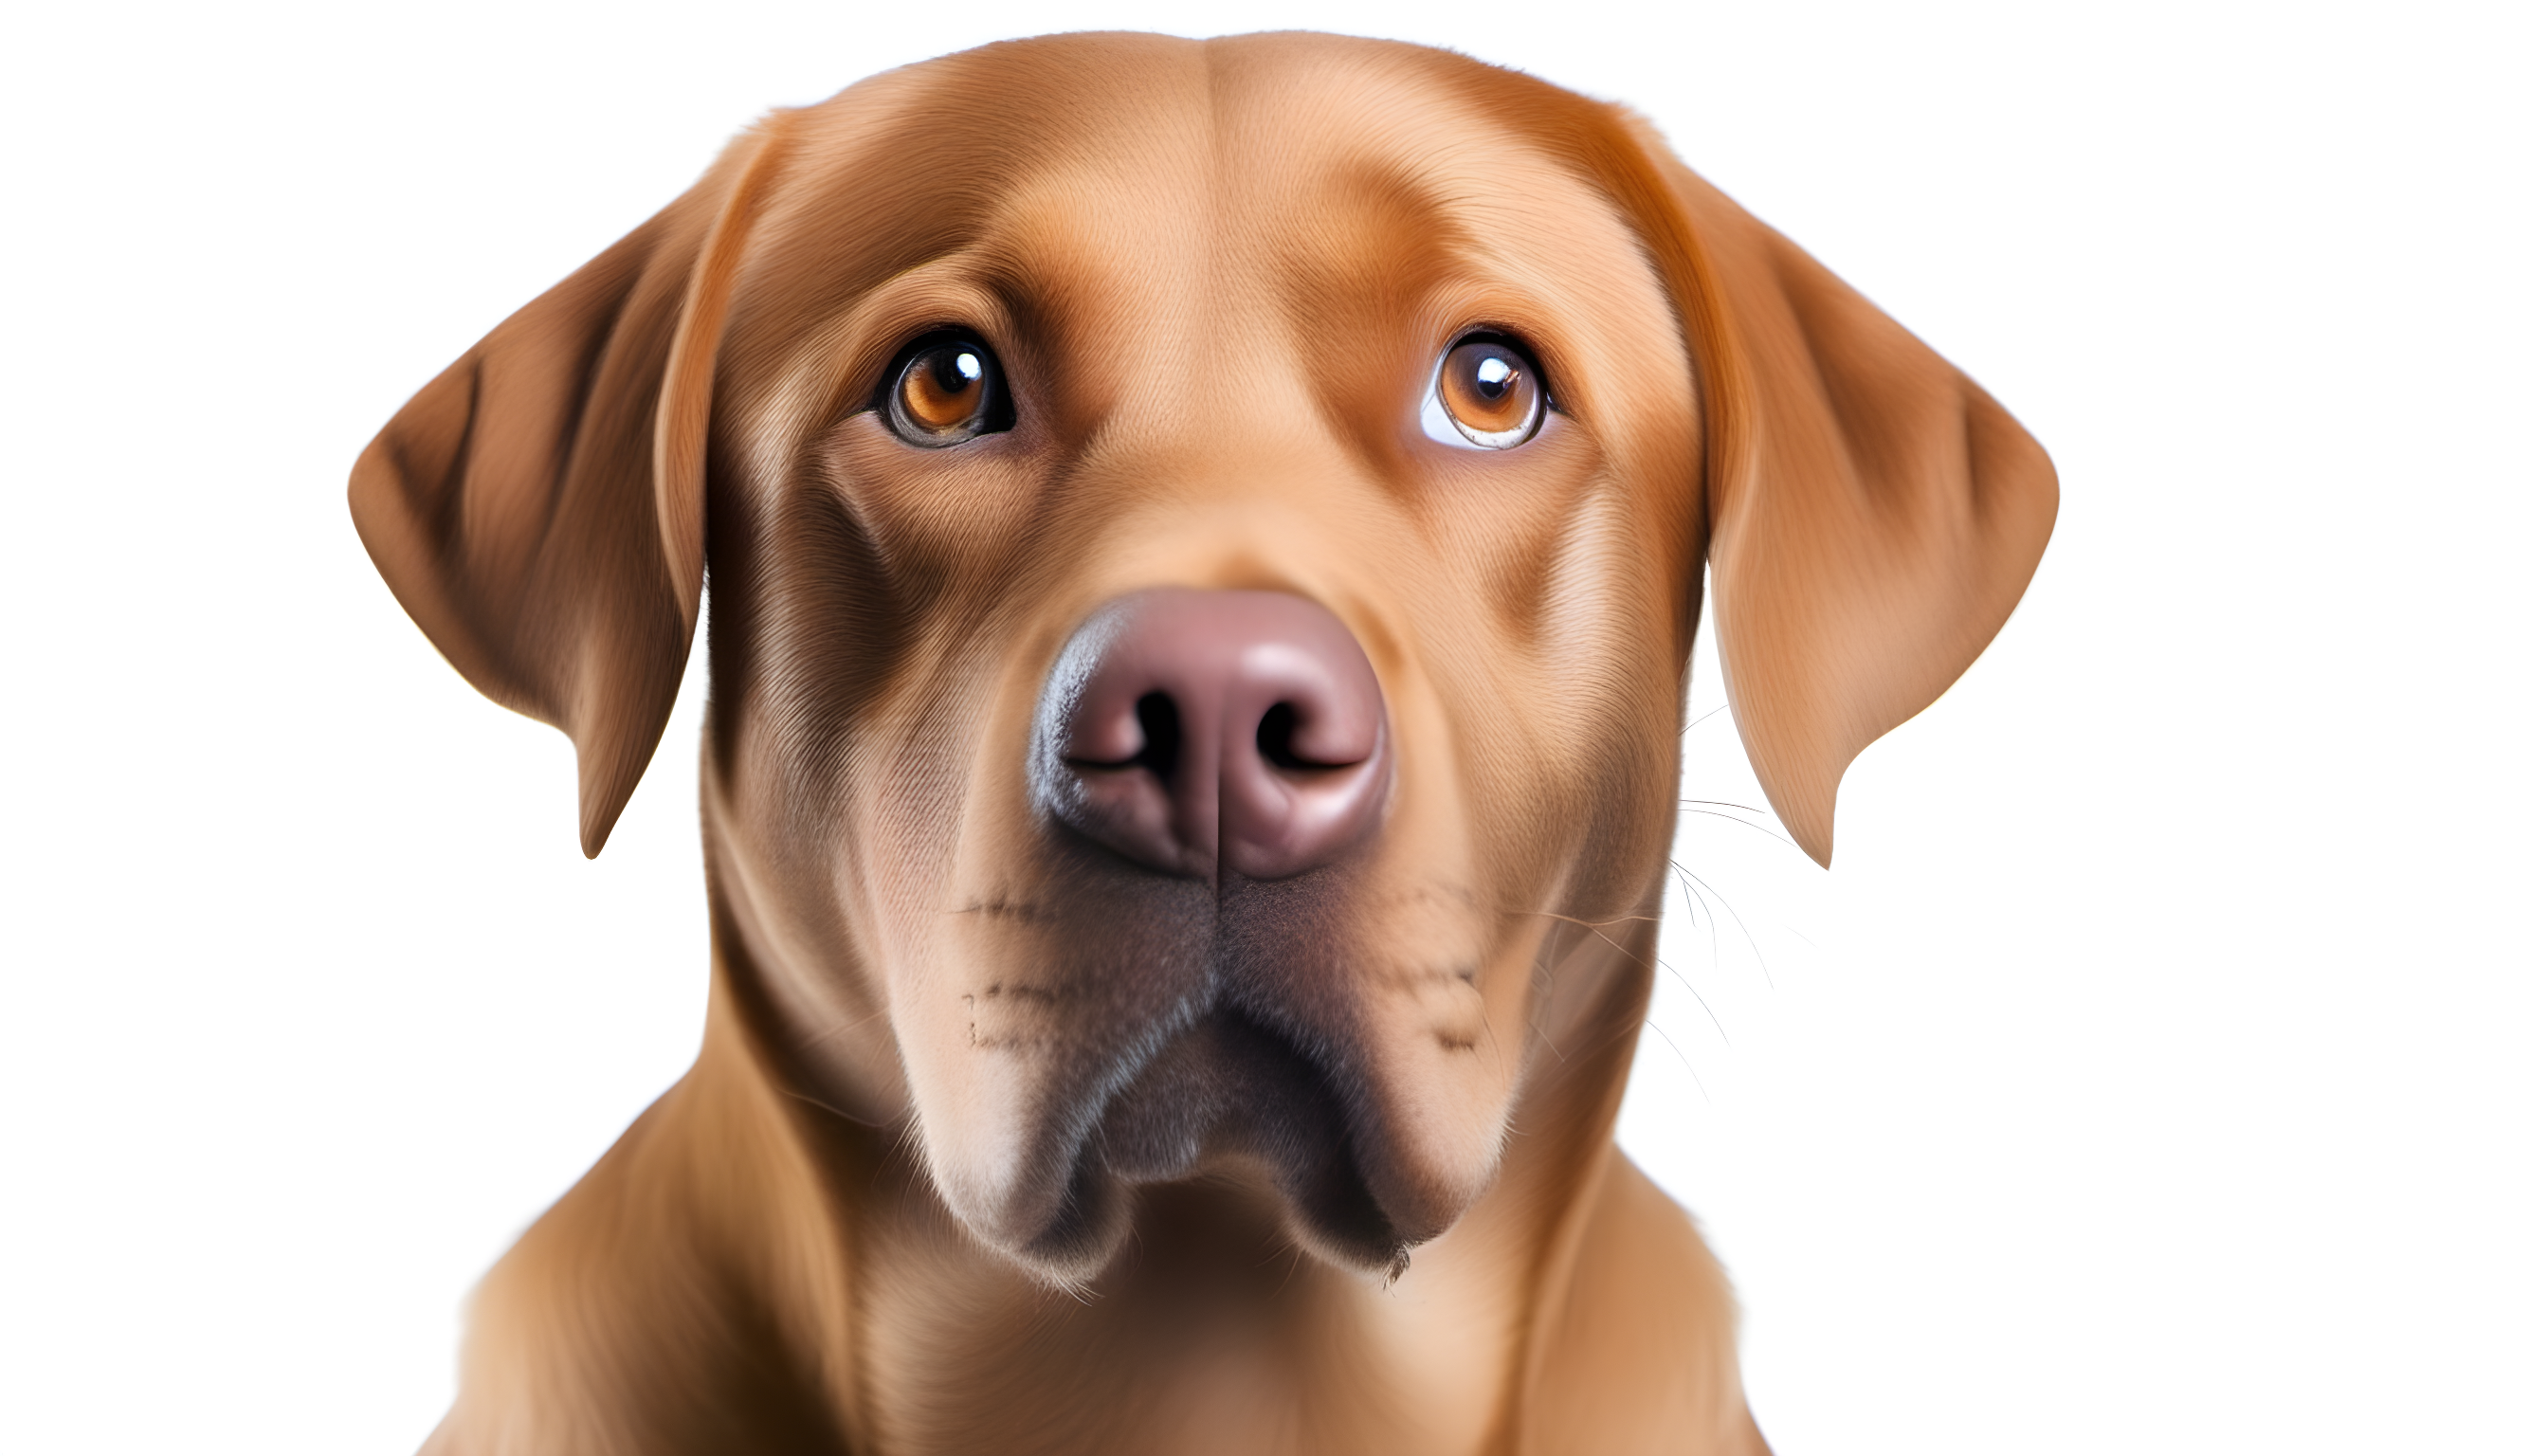 A super-friendly Red Labrador, debunking any color-based aggression myths.